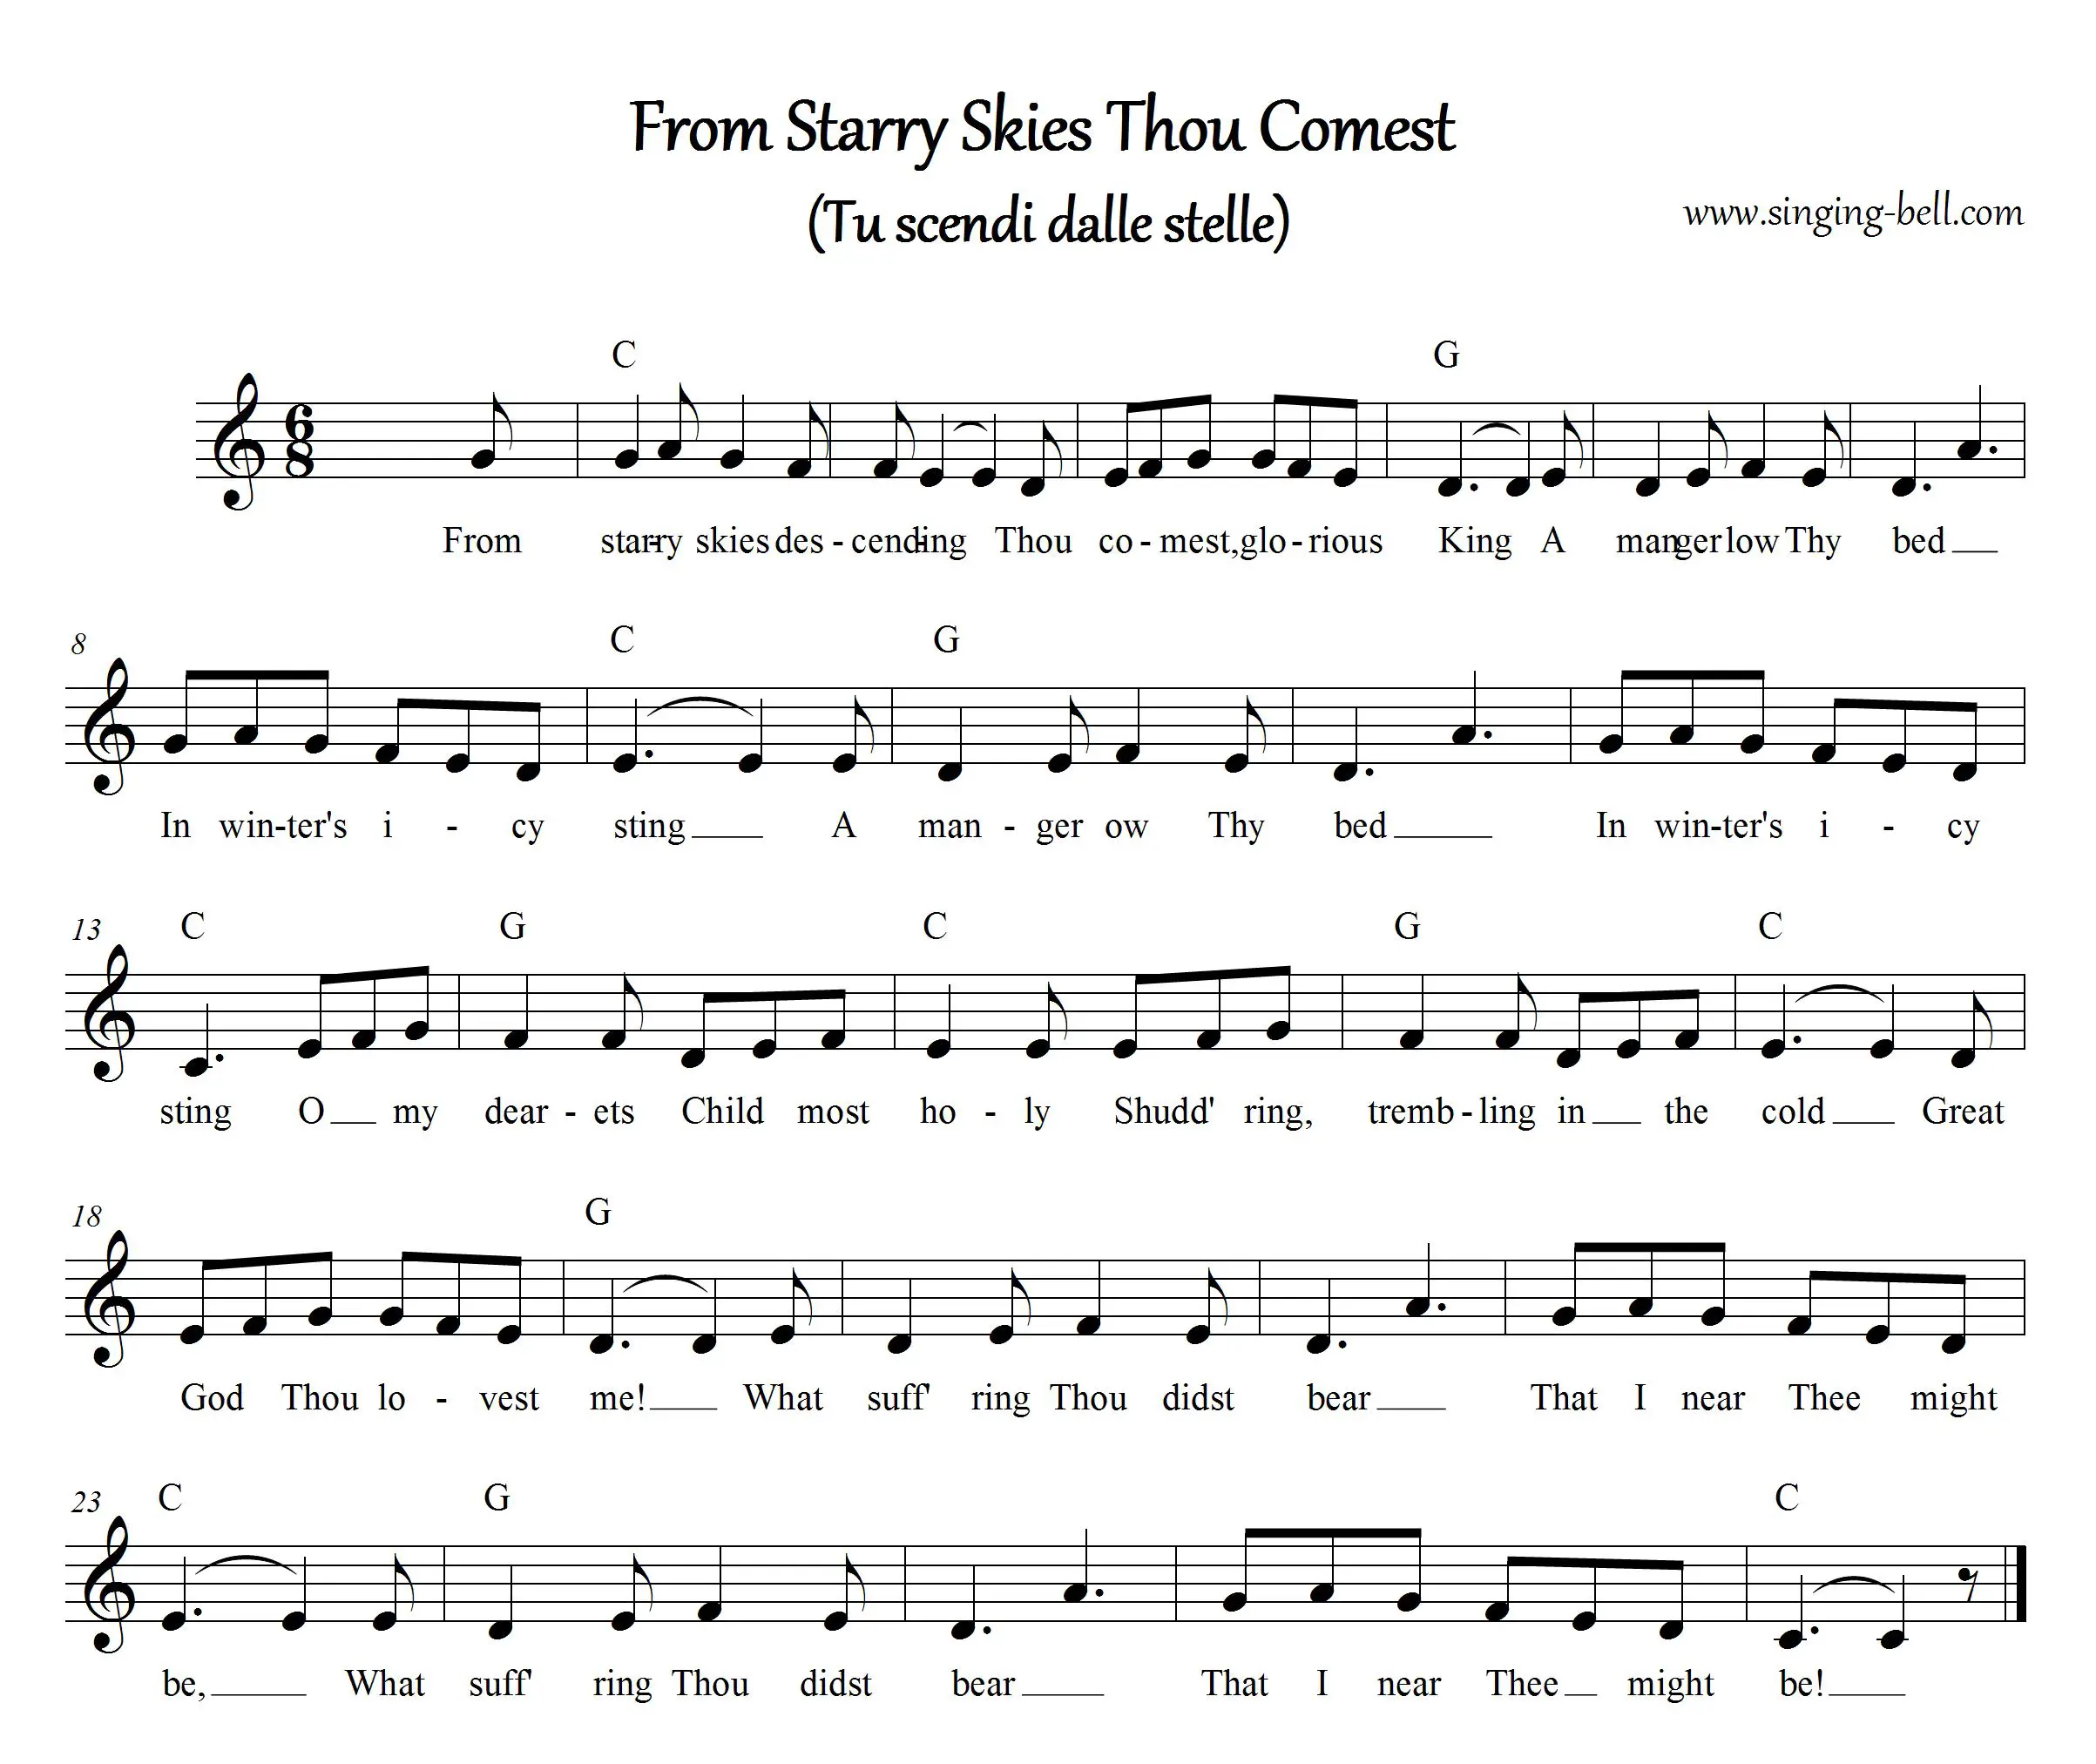 From starry skies (Tu scendi dalle stelle) Free Christmas Music Score Download (in C)